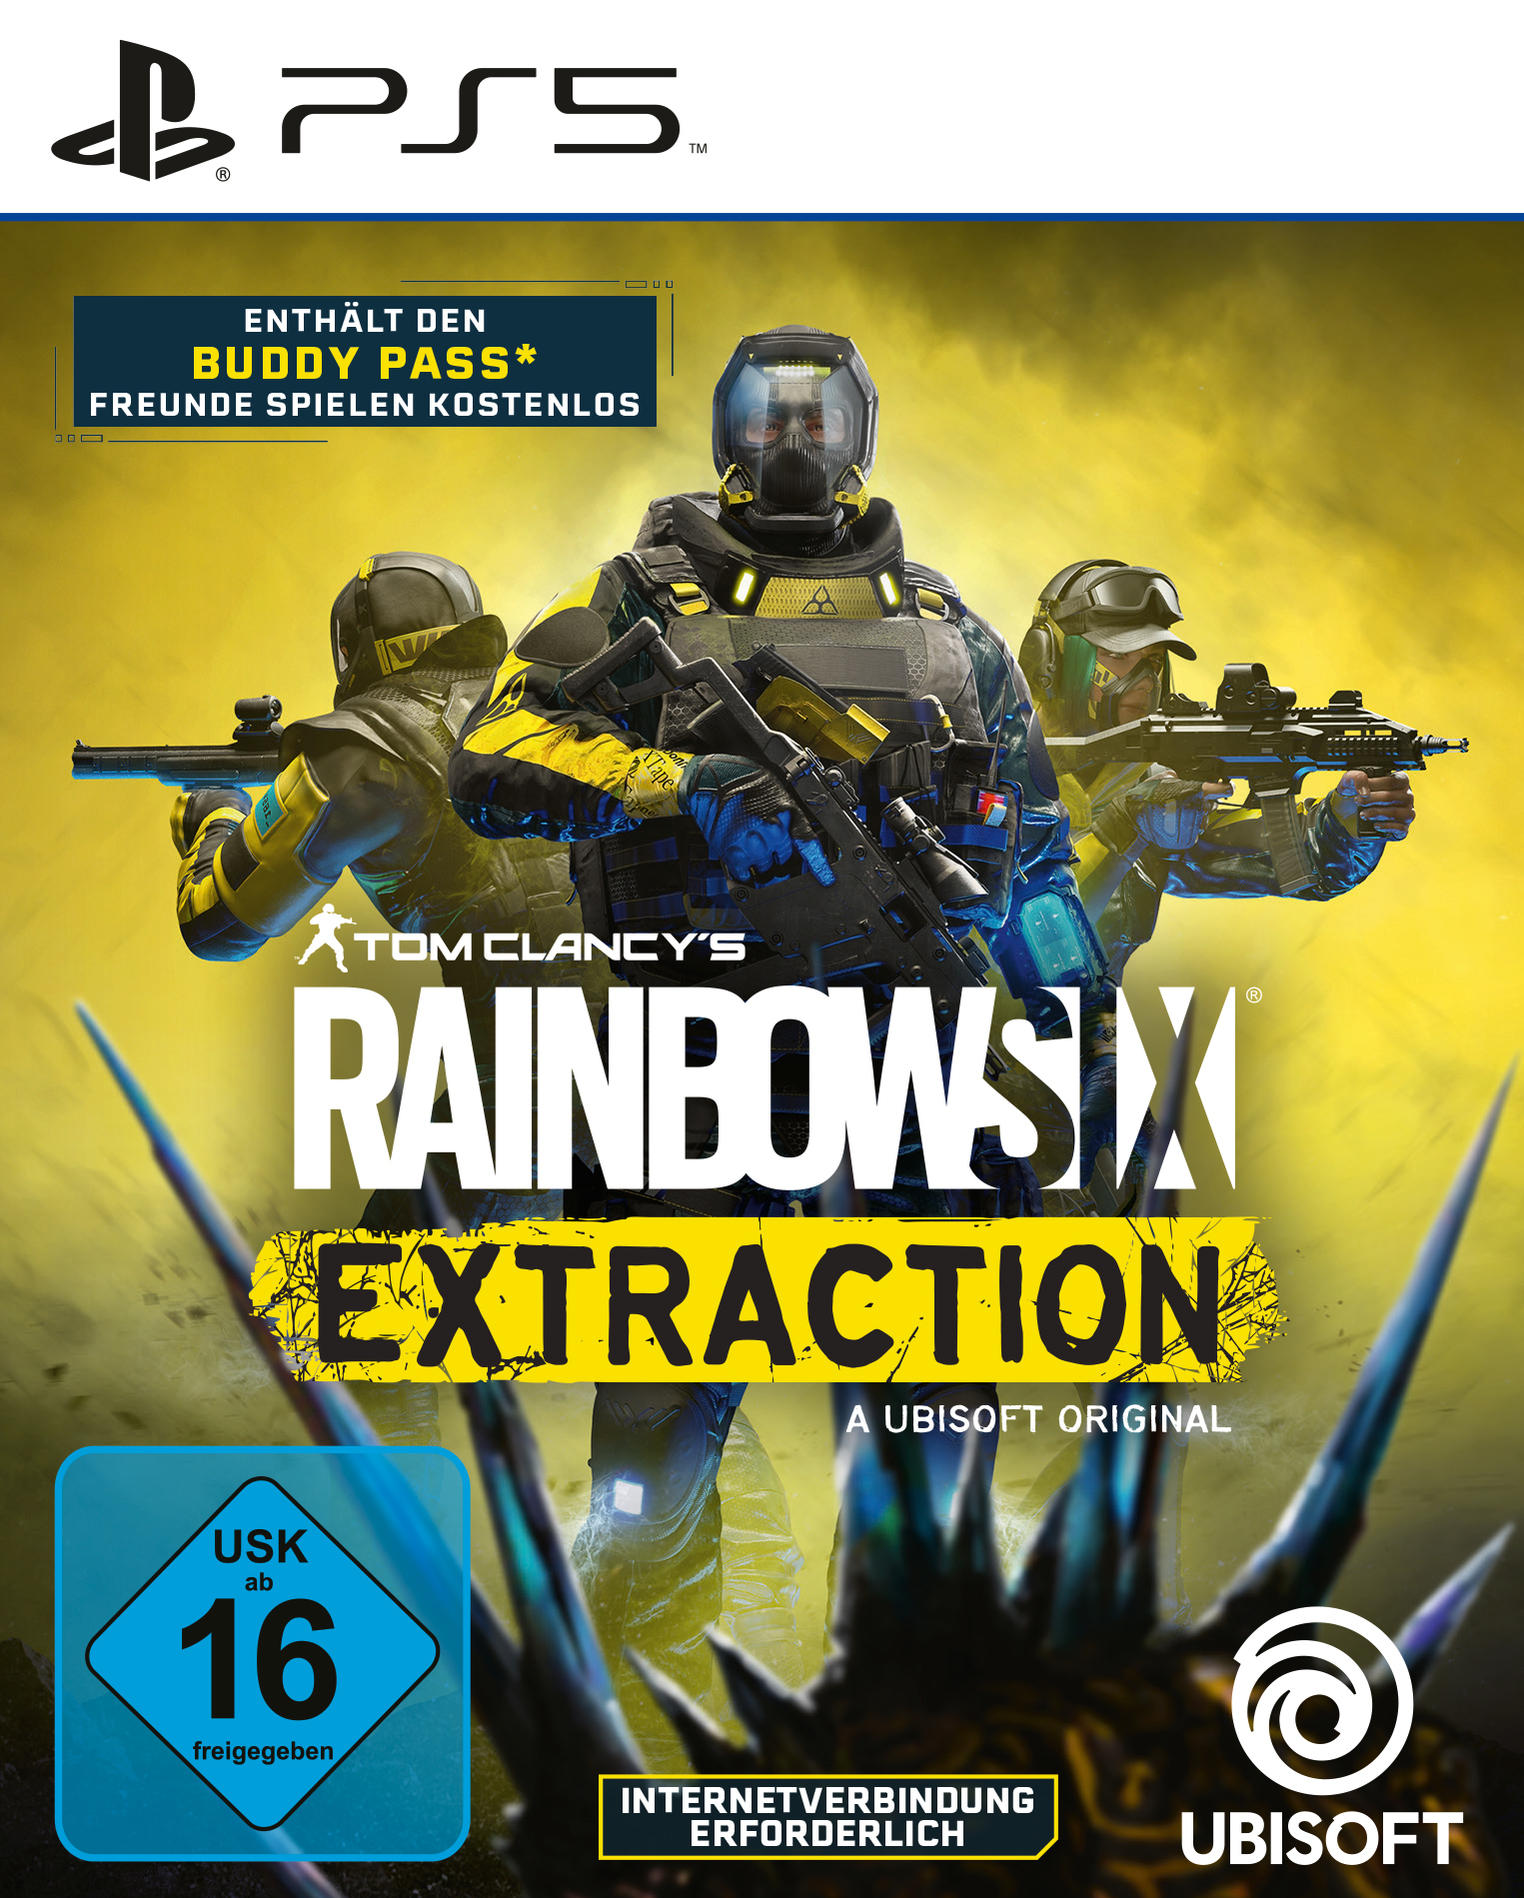 [PlayStation 5] Extraction Tom - Rainbow Six Clancy\'s